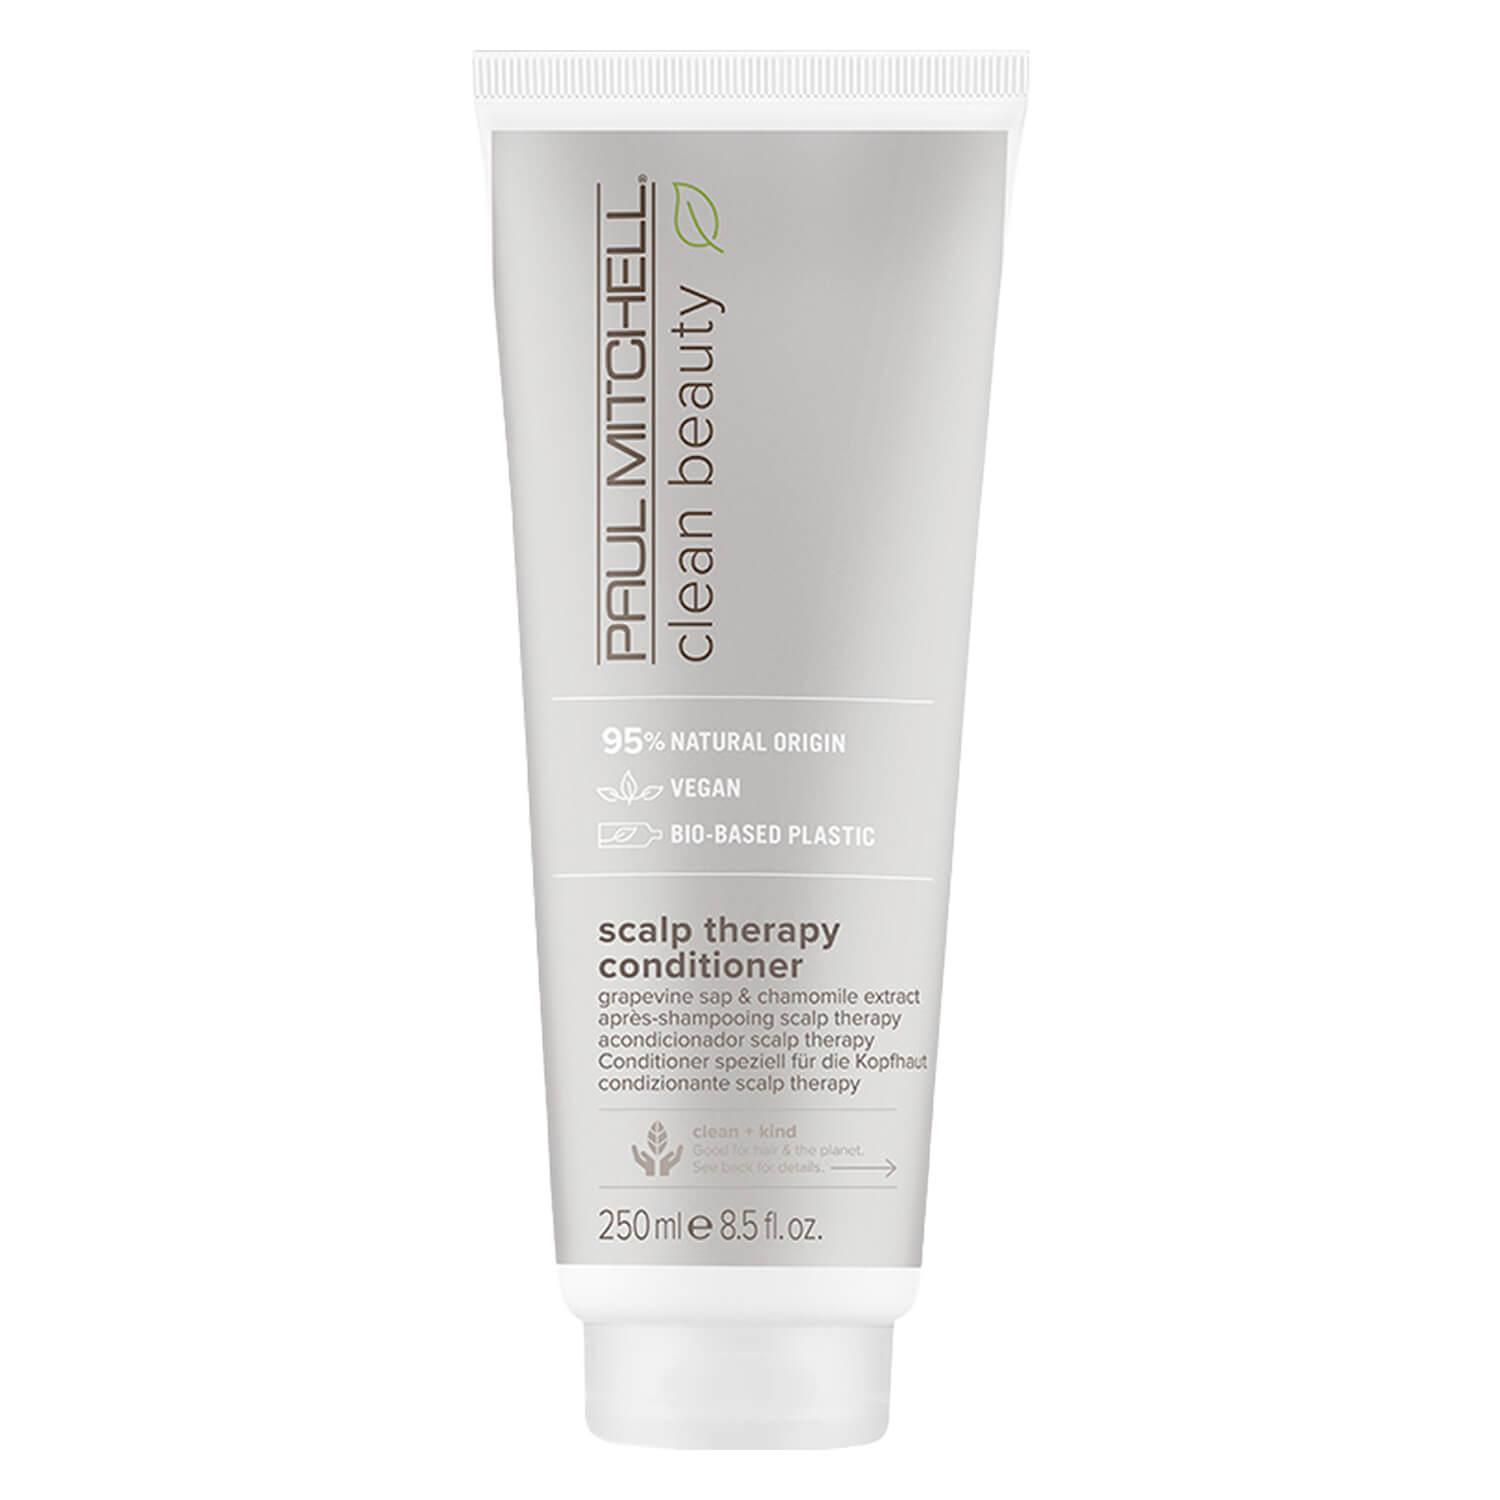 Paul Mitchell Clean Beauty - Scalp Therapy Conditioner